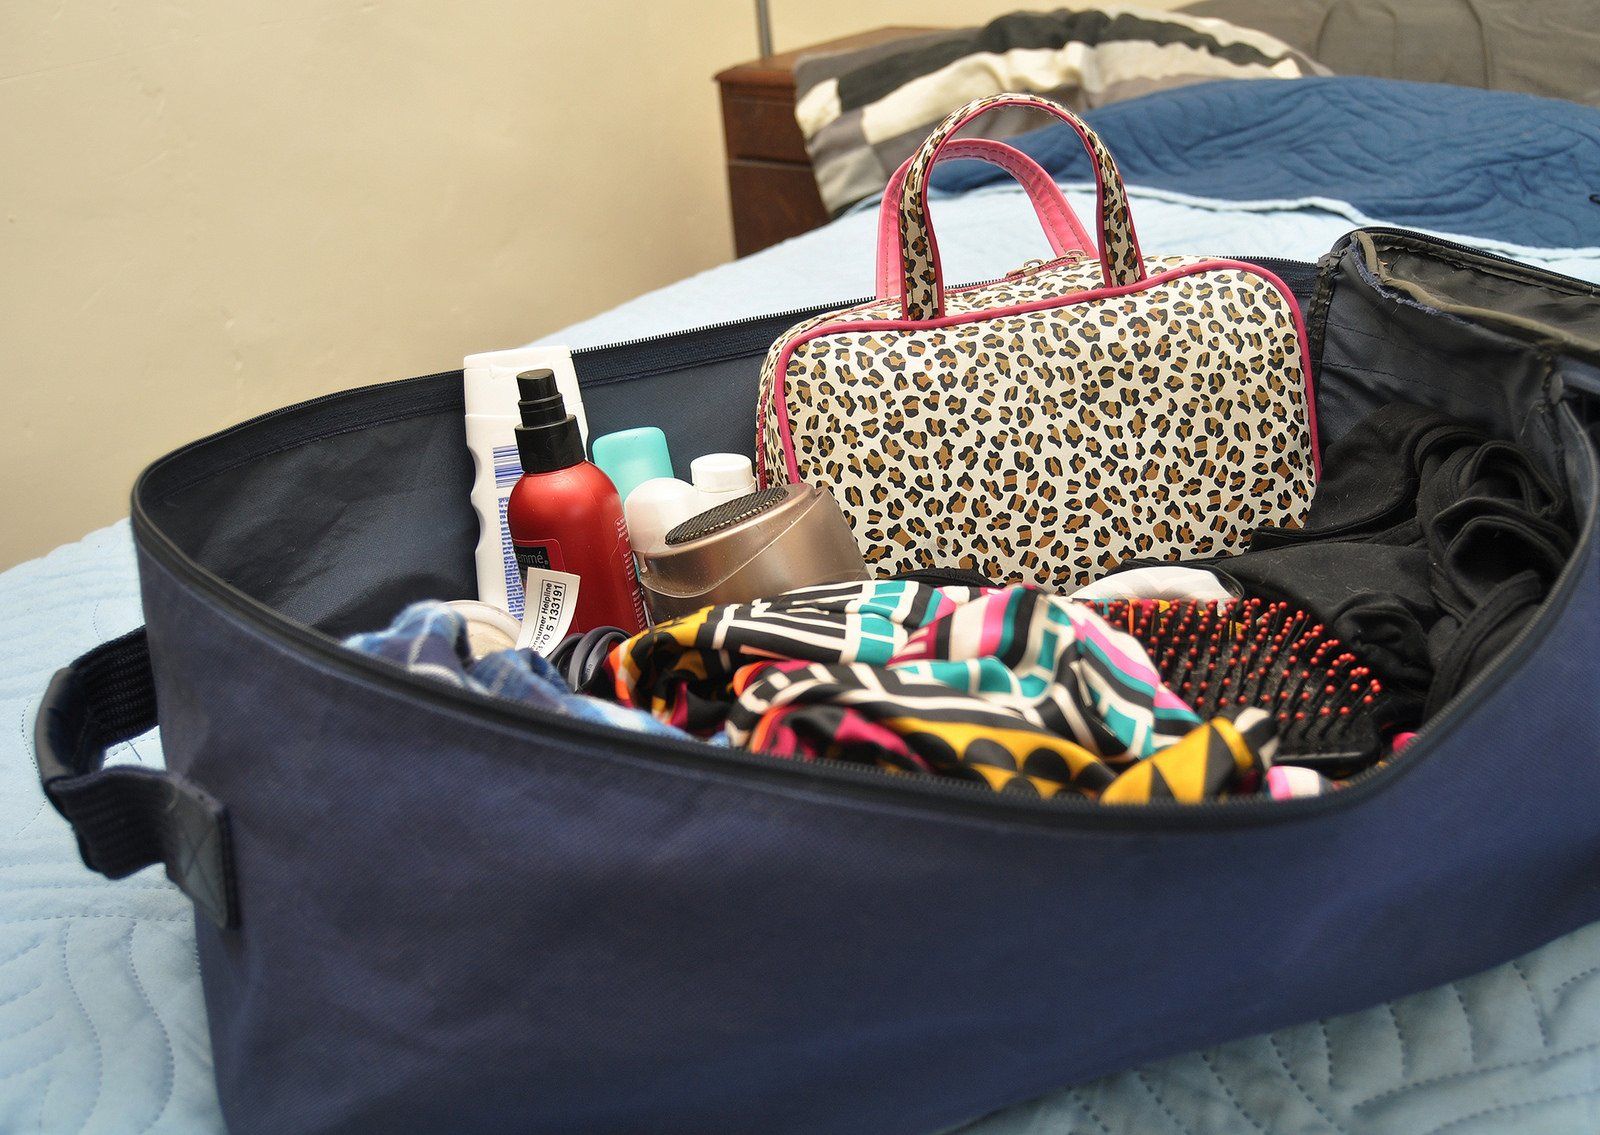 4 things you need in your summer holiday toiletries bag - Beauty Hair Products Ltd